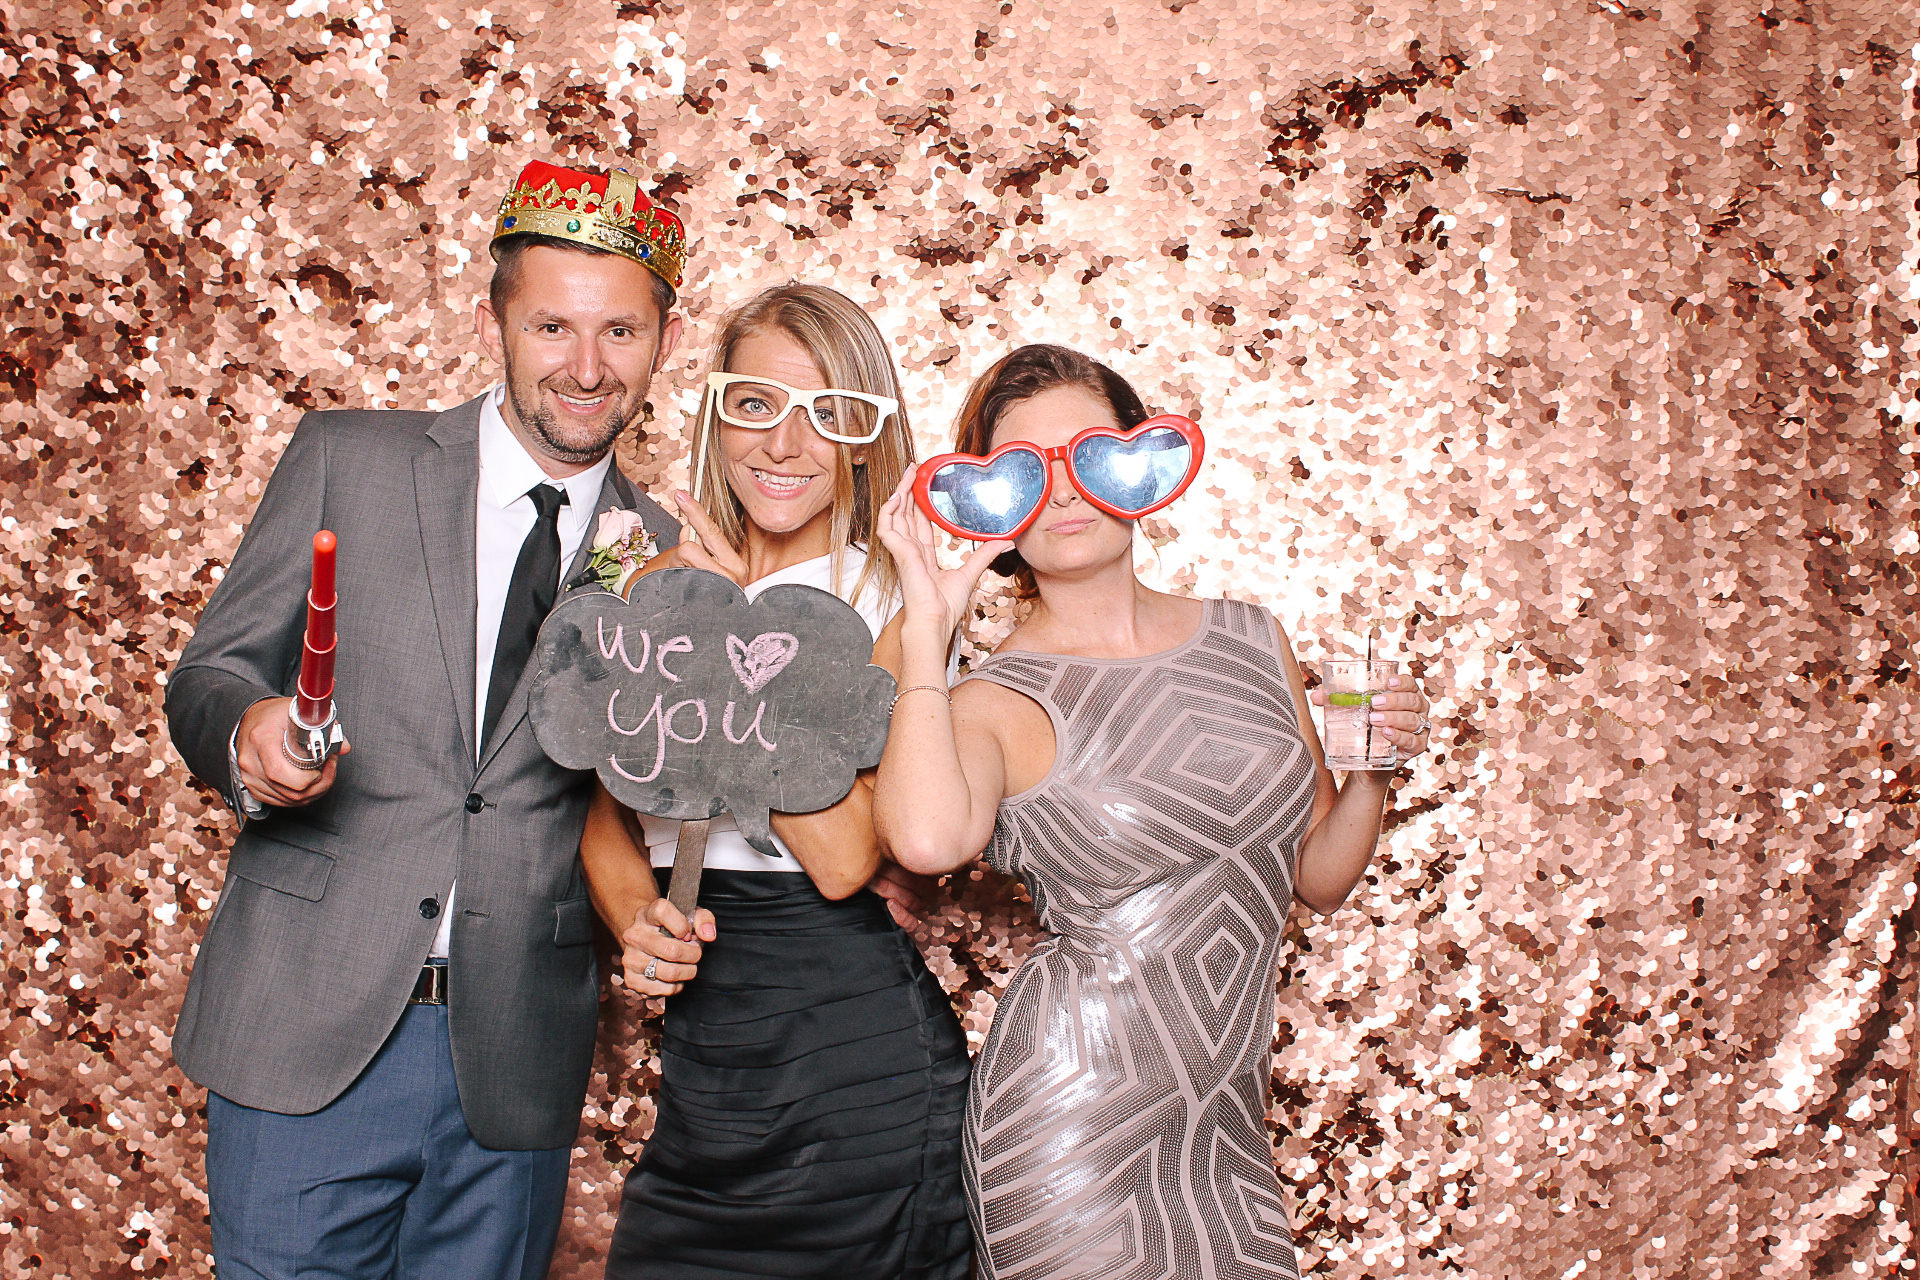 00053 Dajana and Phil Taylor Wedding Photos photobooth by too much awesomeness.jpg